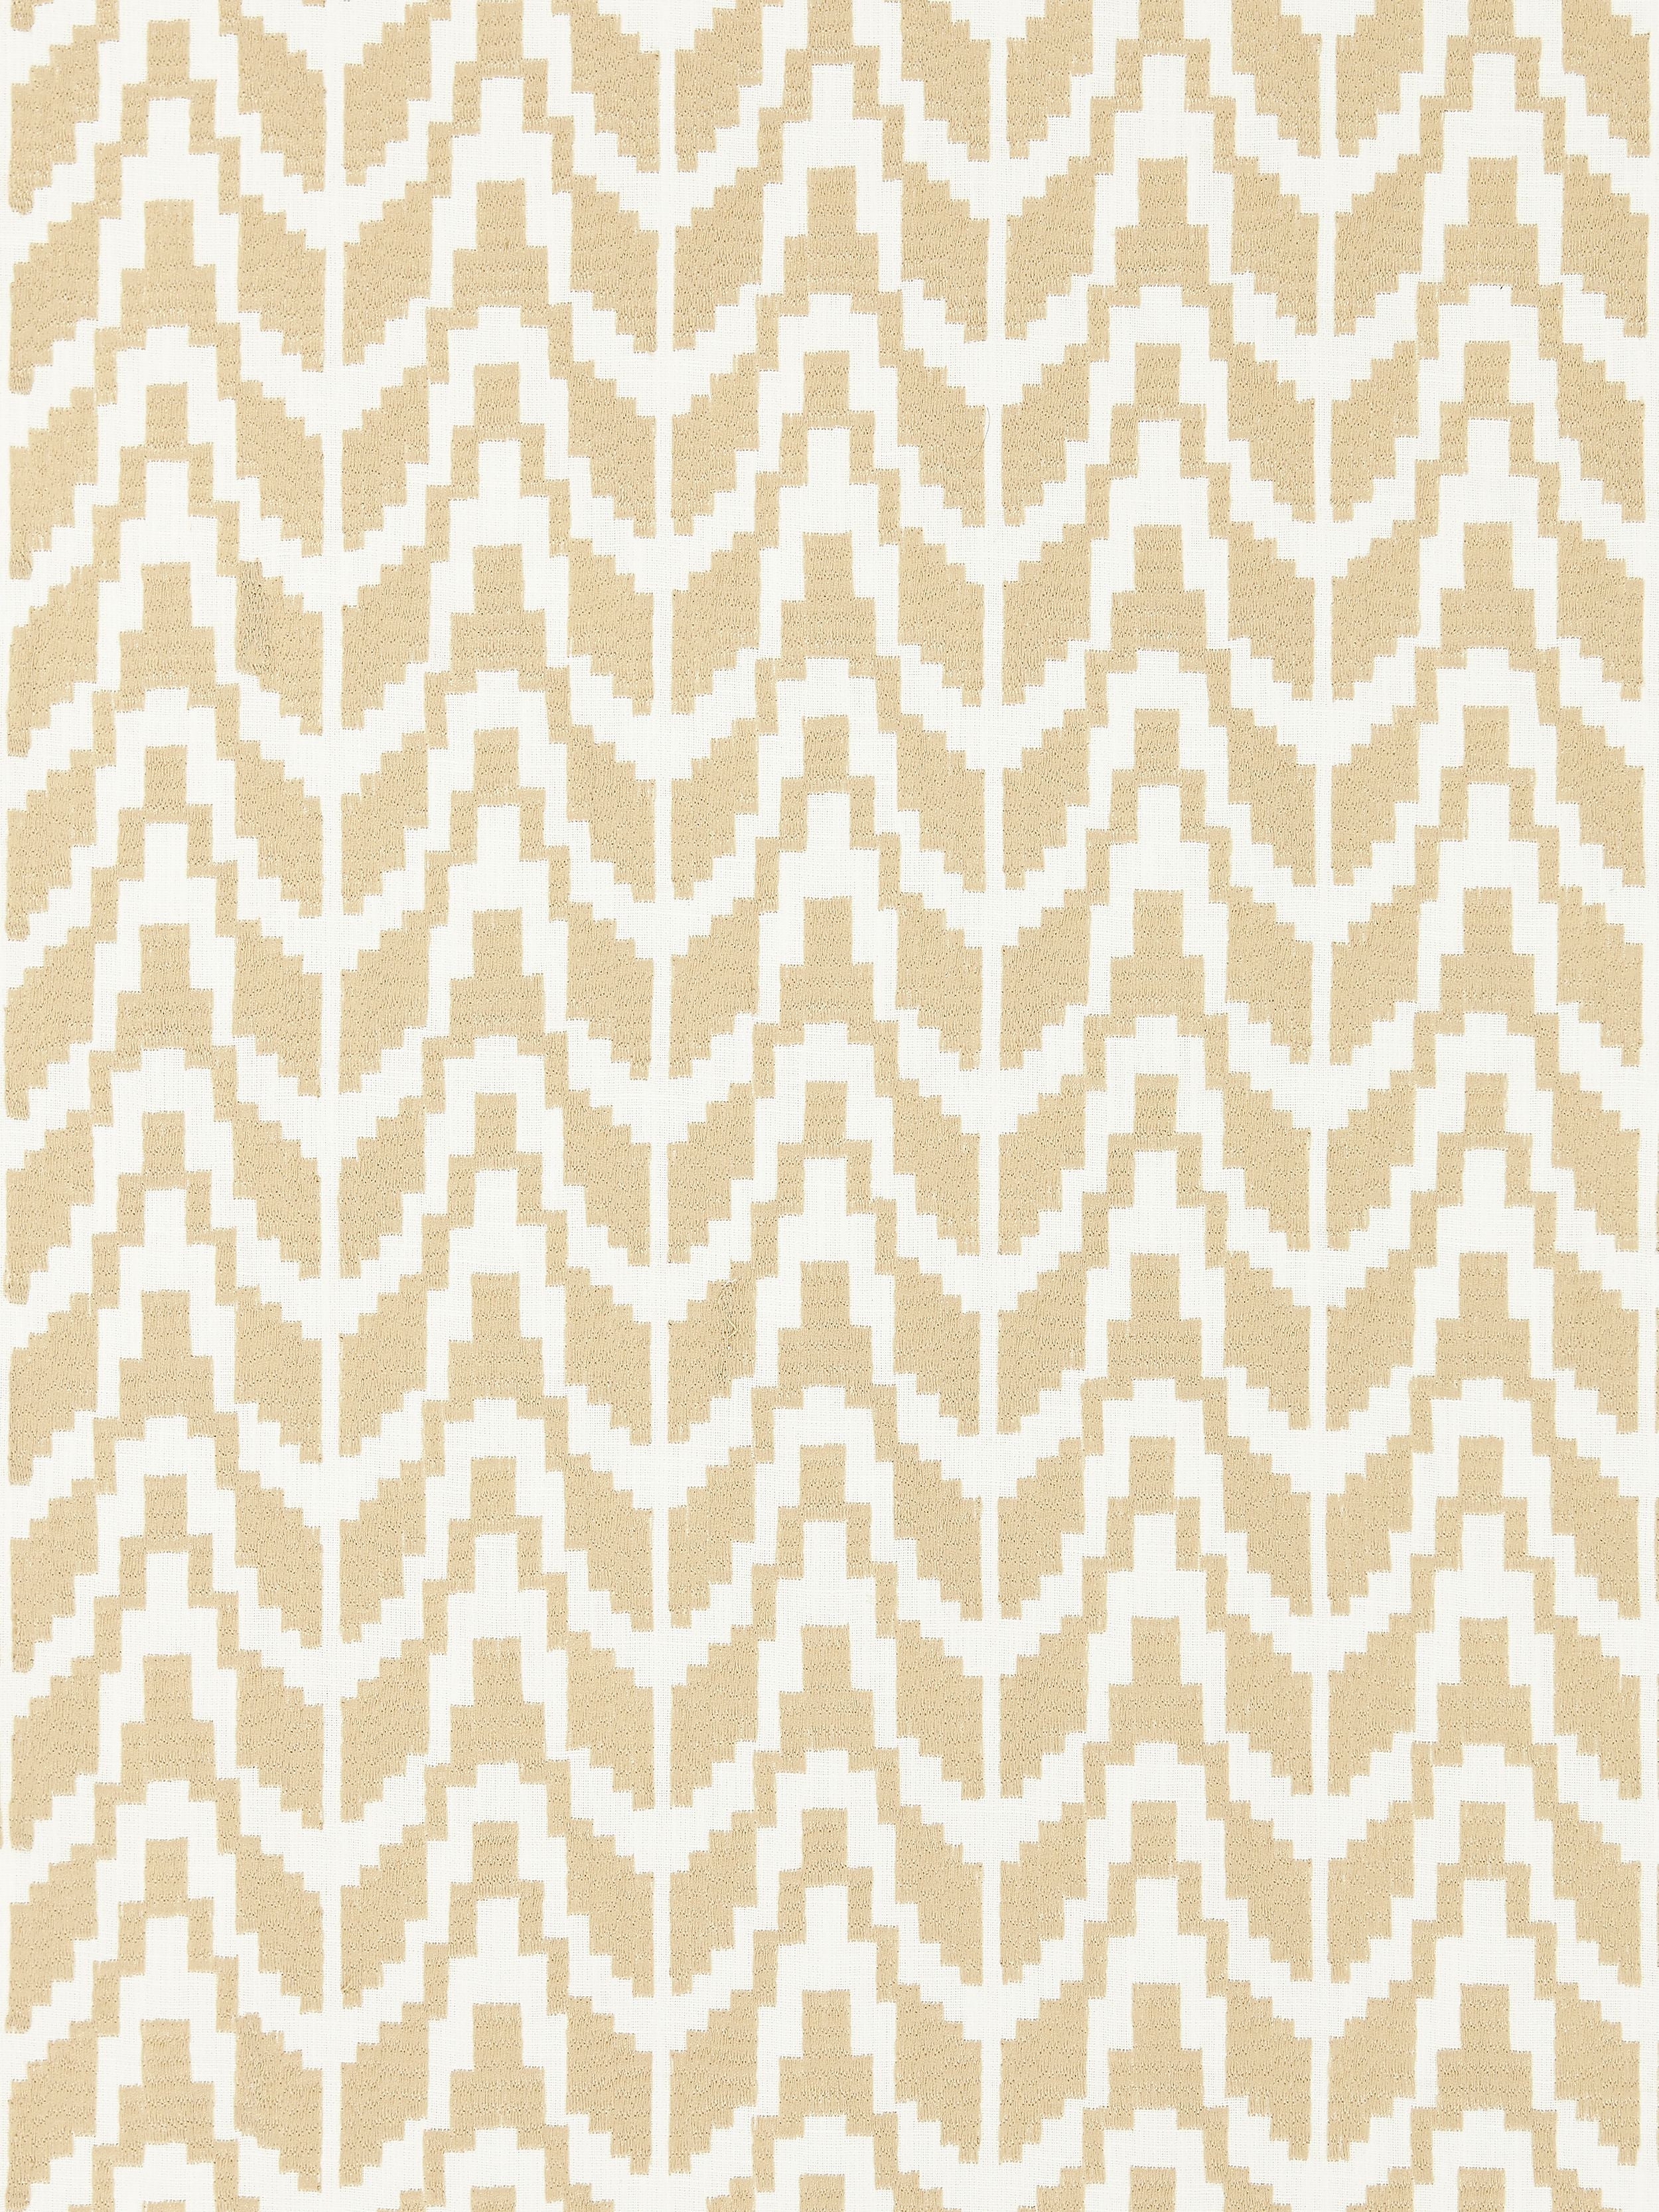 Chevron Embroidery fabric in straw color - pattern number SC 000127103 - by Scalamandre in the Scalamandre Fabrics Book 1 collection